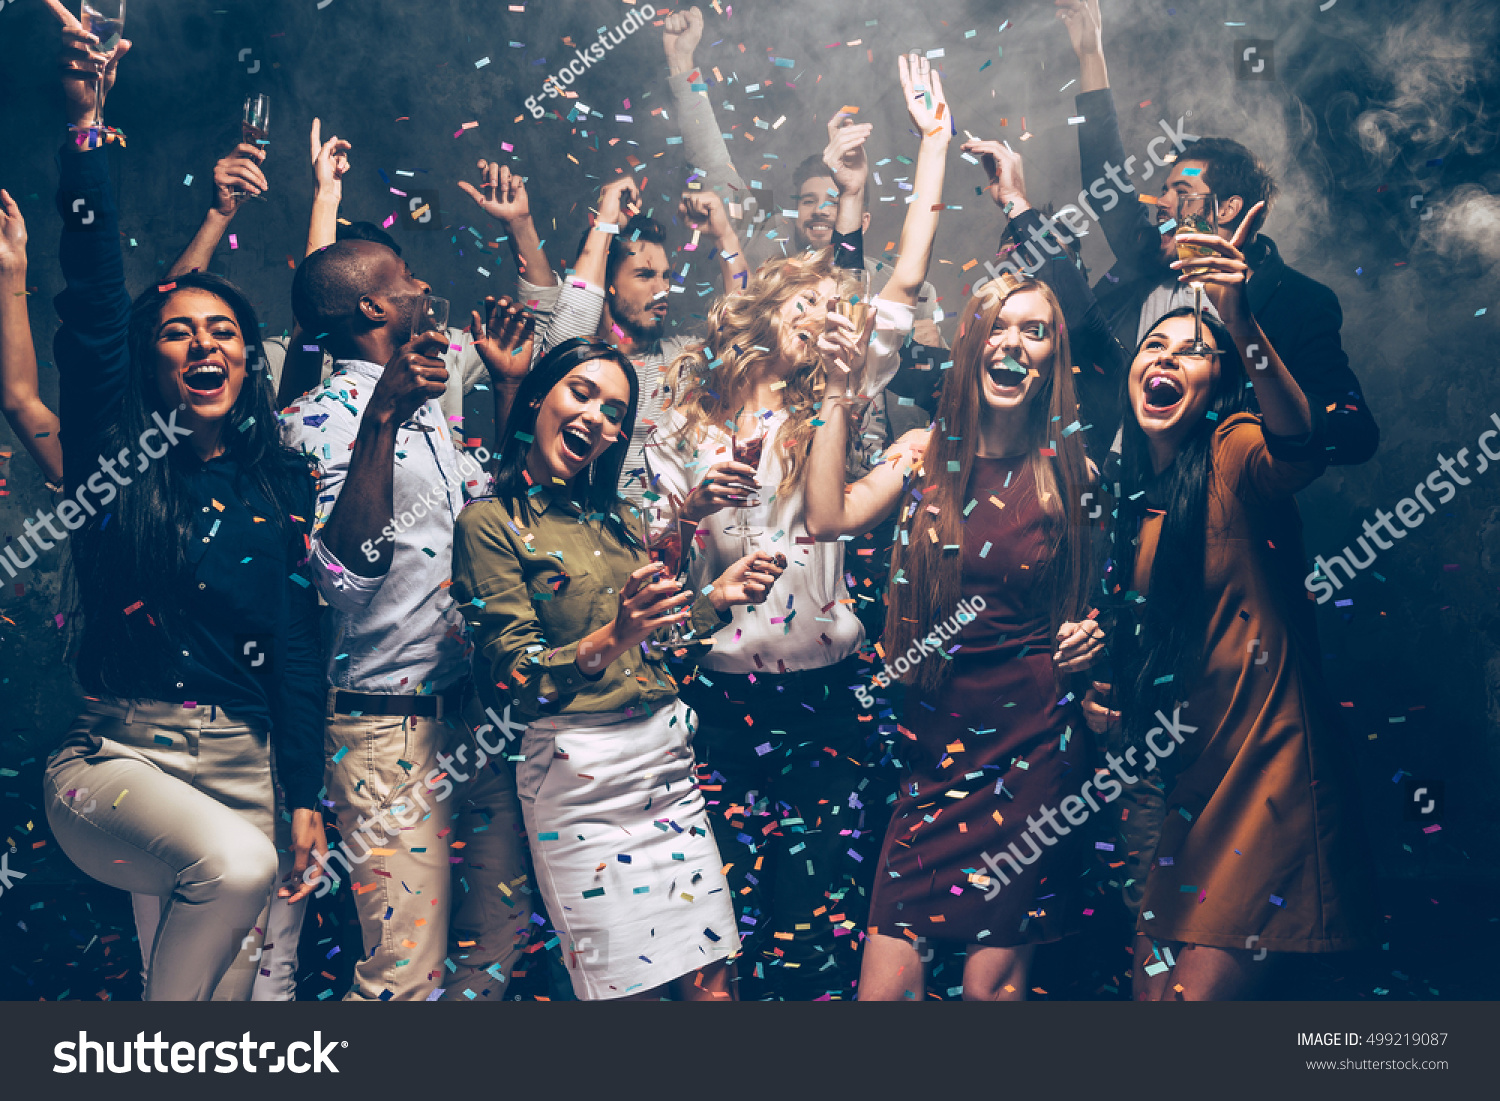 Party fun. Group of beautiful young people throwing colorful confetti and looking happy #499219087